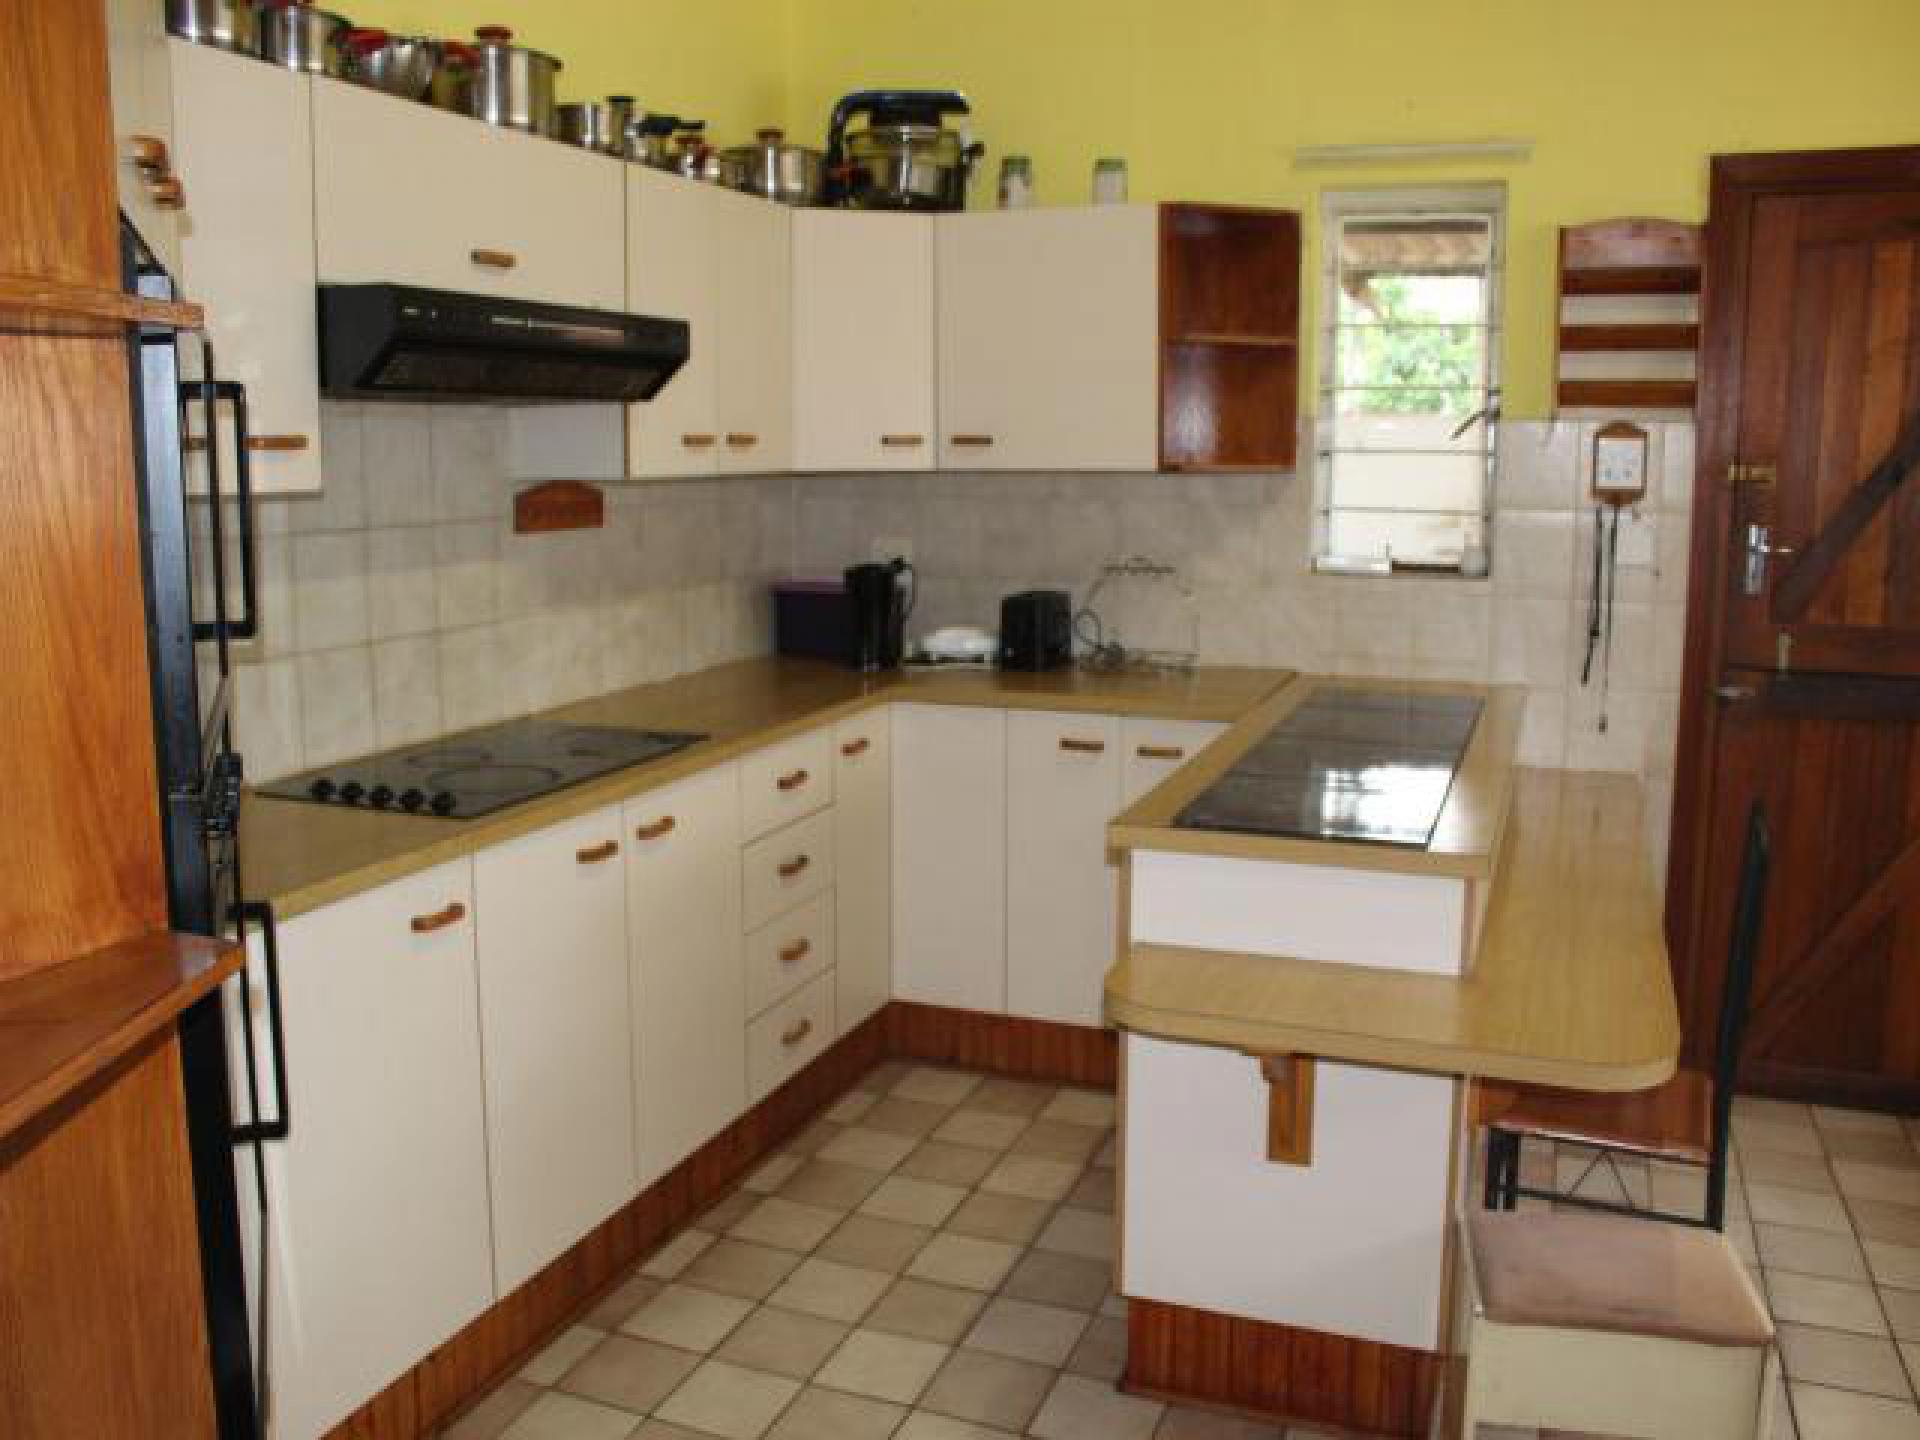 Kitchen of property in Kirkwood